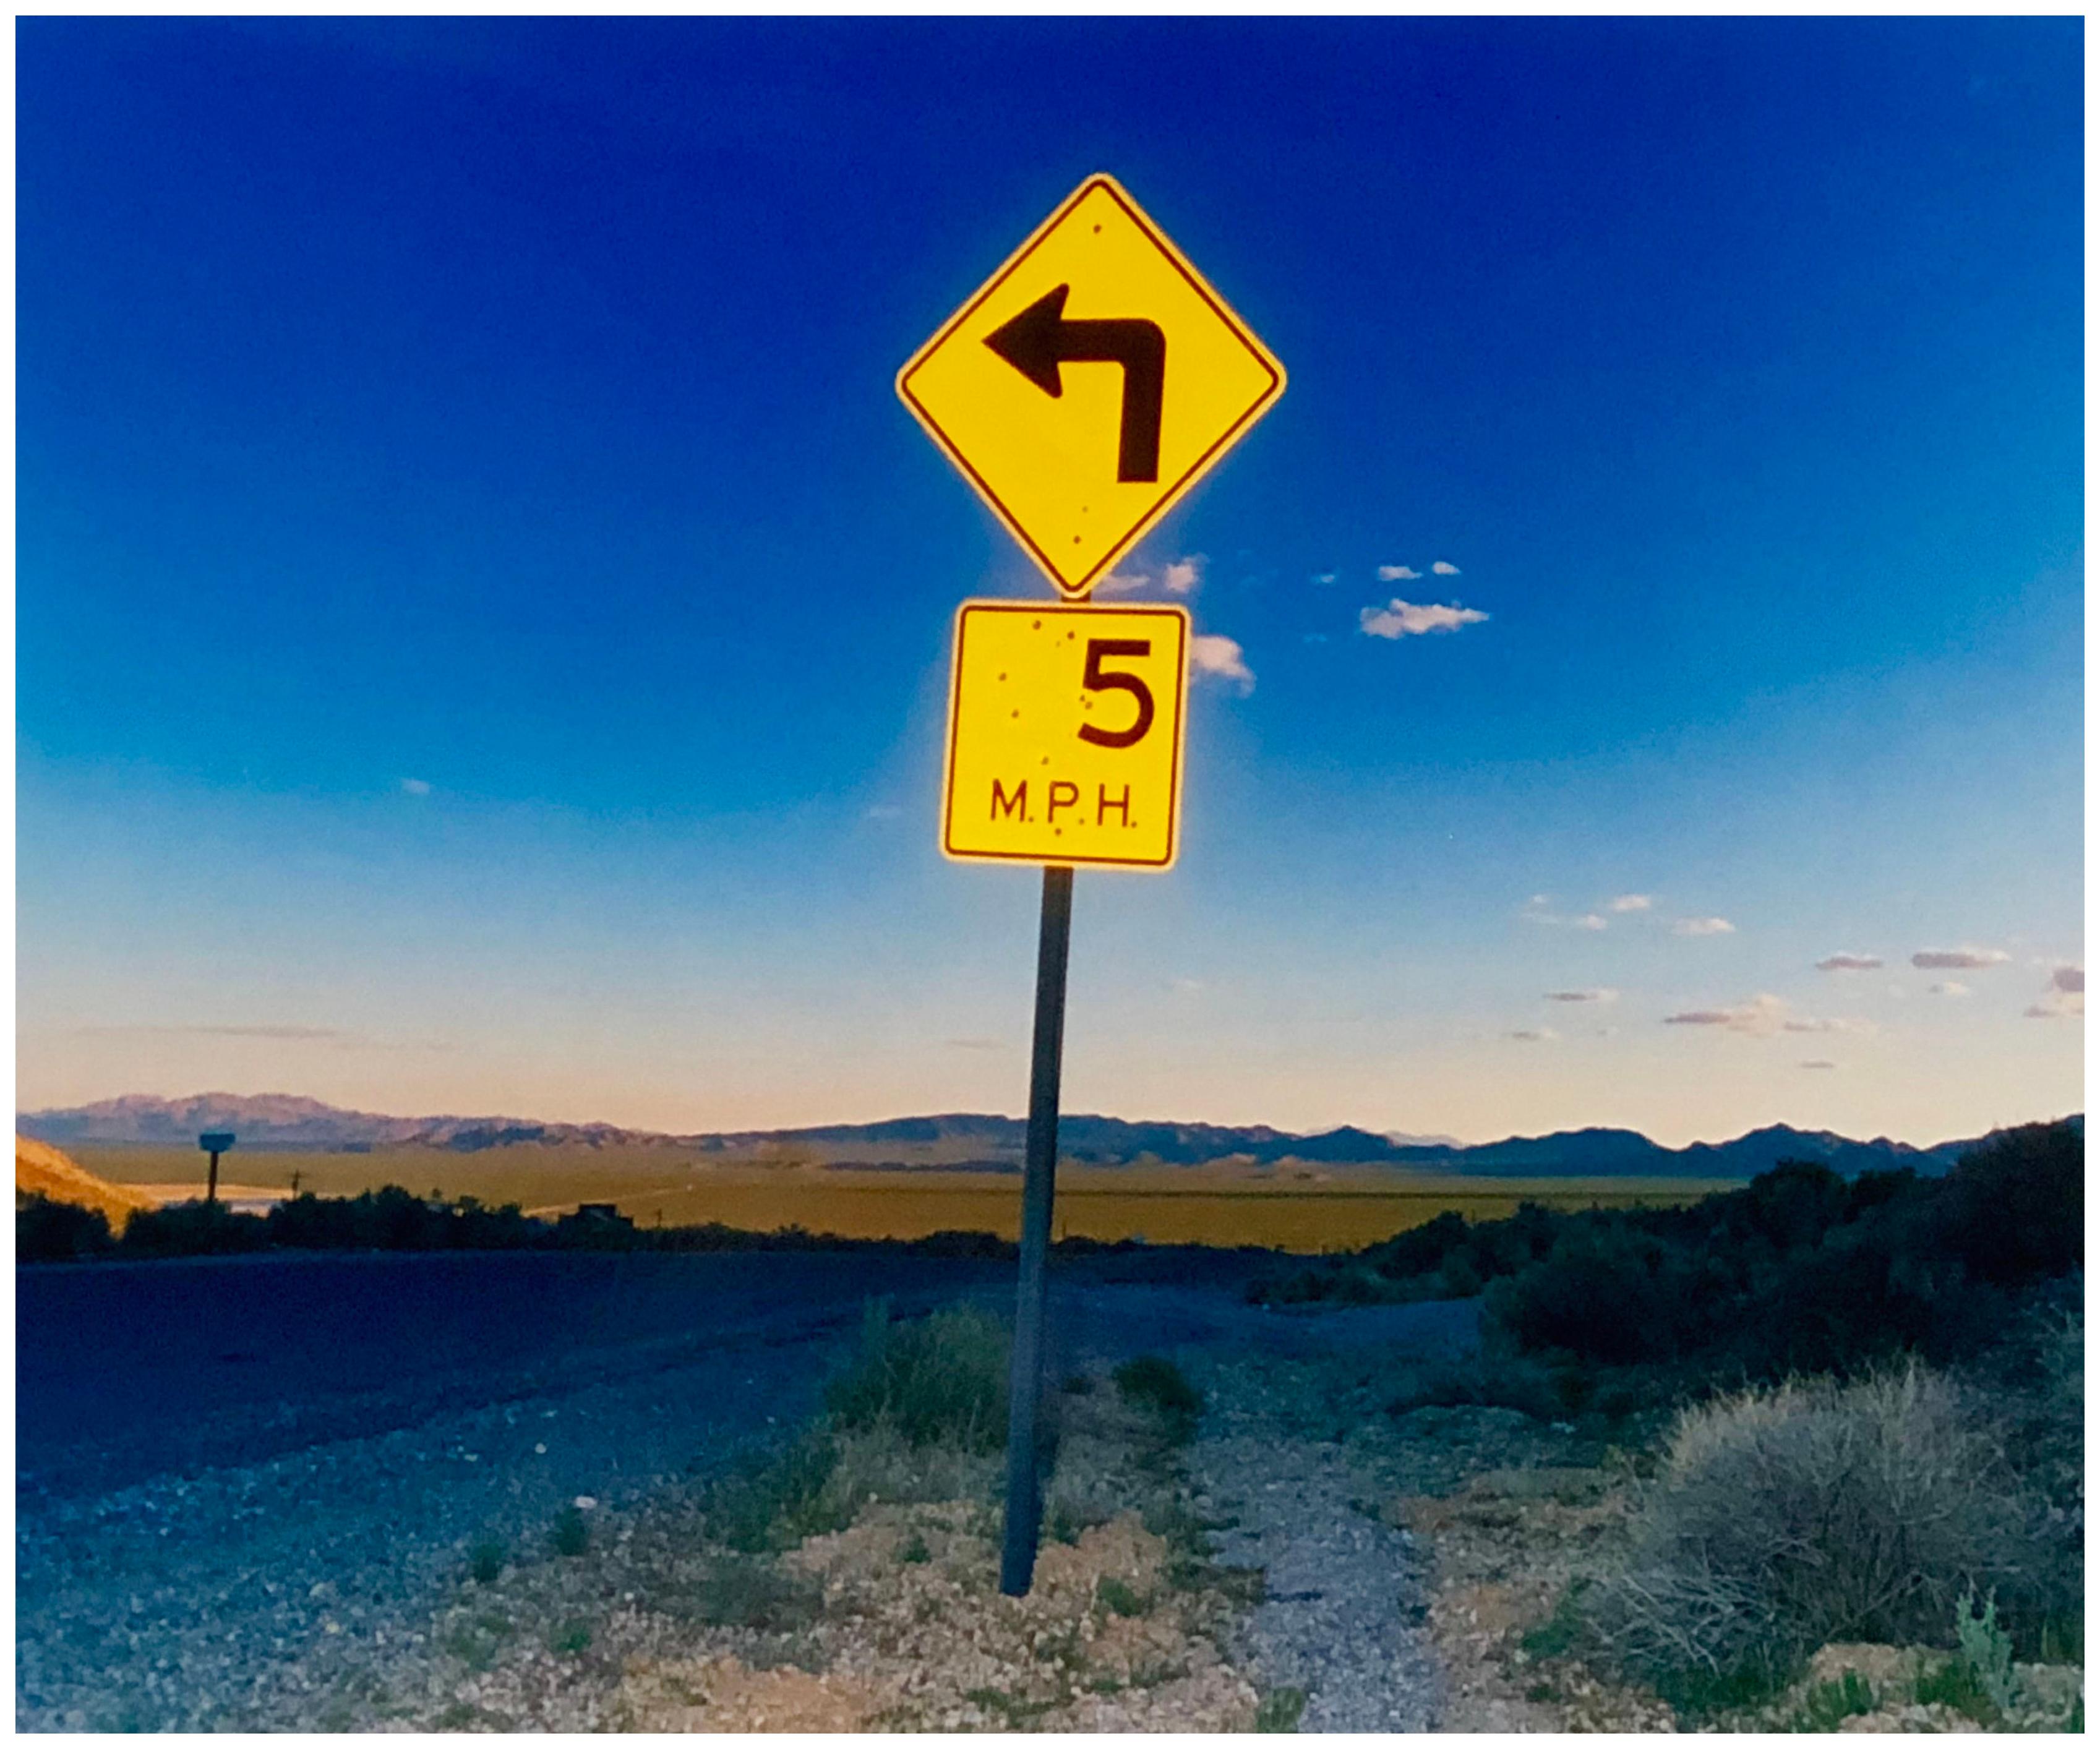 Five Miles Per Hour, Rhyolite, Nevada, photograph from Richard Heeps 'Dream in Color' Series. This photograph taken at dusk captures the sunset in the valley.  The area was once a goldmine, now a ghost town. The sign, 5MPH is so cautious but on